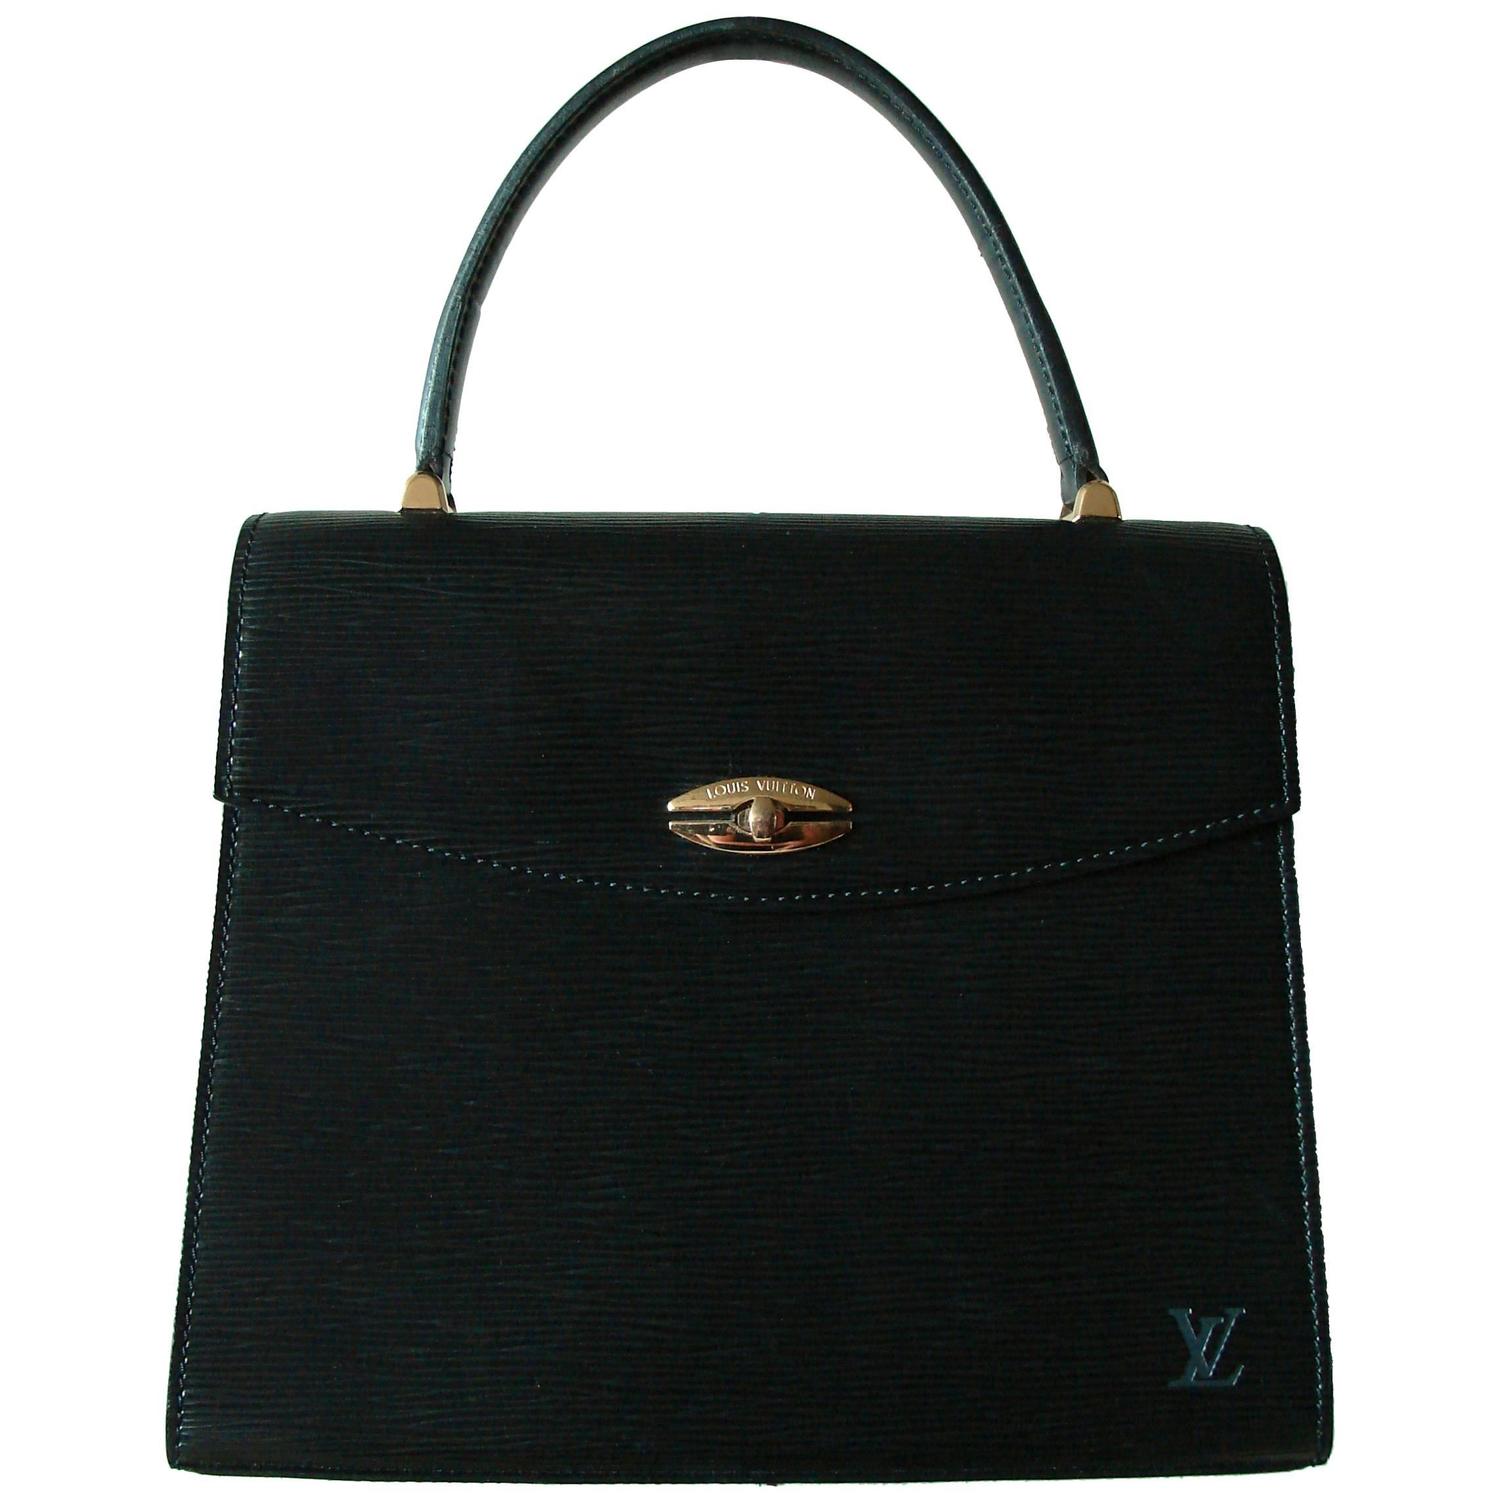 Classic Louis Vuitton Malesherbes Bag Black Epi Leather Handbag + Dust Cover &#39;97 For Sale at 1stdibs